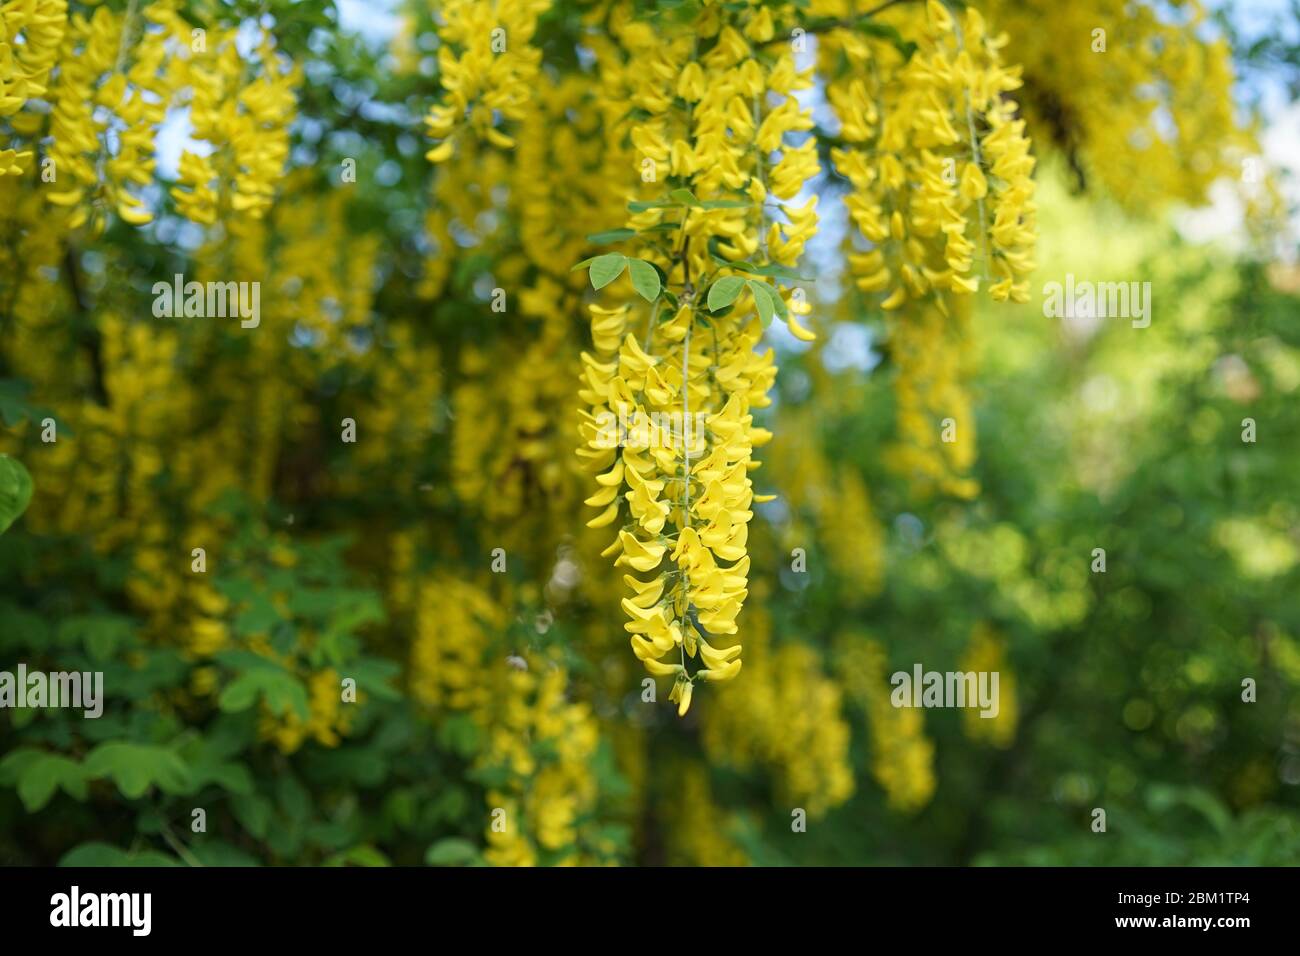 Laburnum, sometimes called golden chain or golden rain, is a genus of two species of small trees in the subfamily Faboideae of the pea family Fabacea. Stock Photo